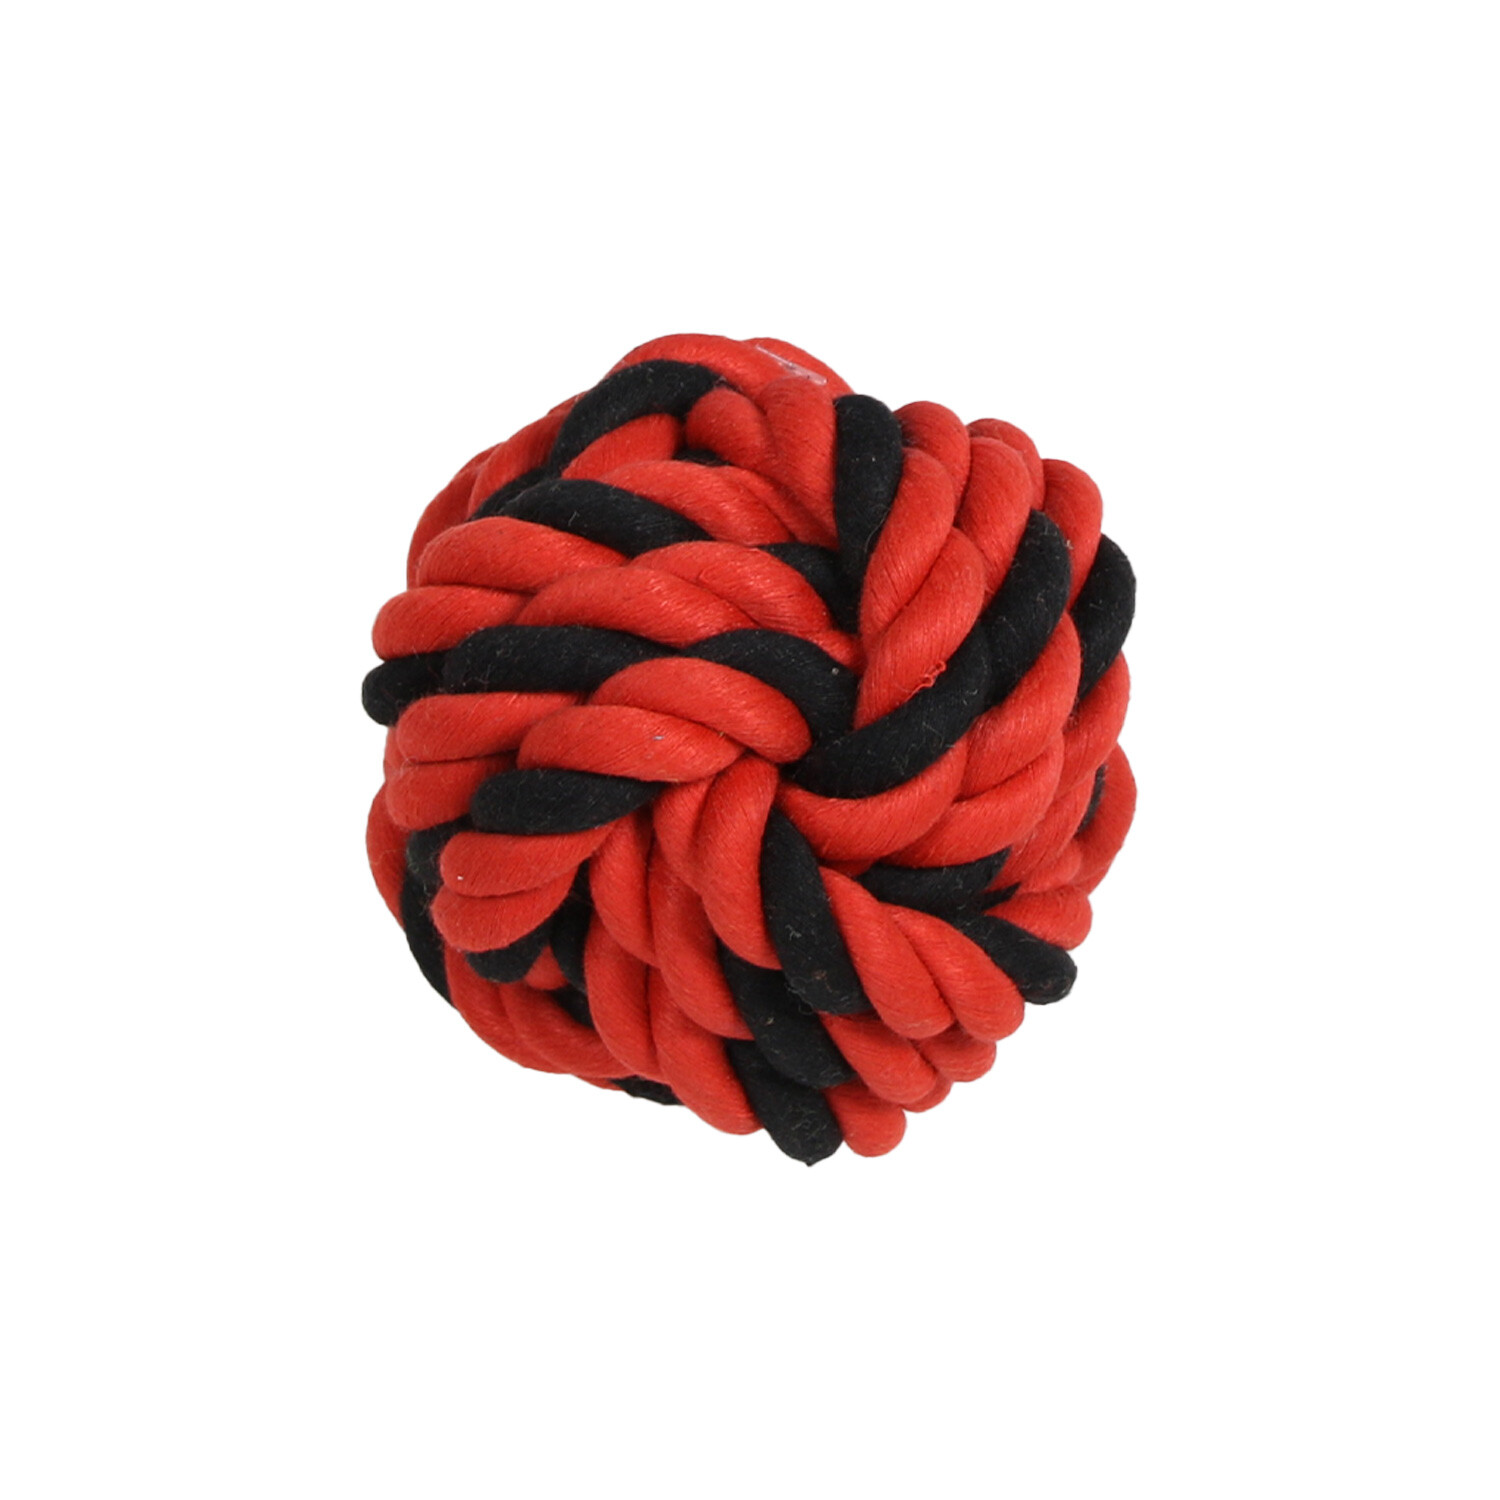 Rope Knot Ball - Small Image 5